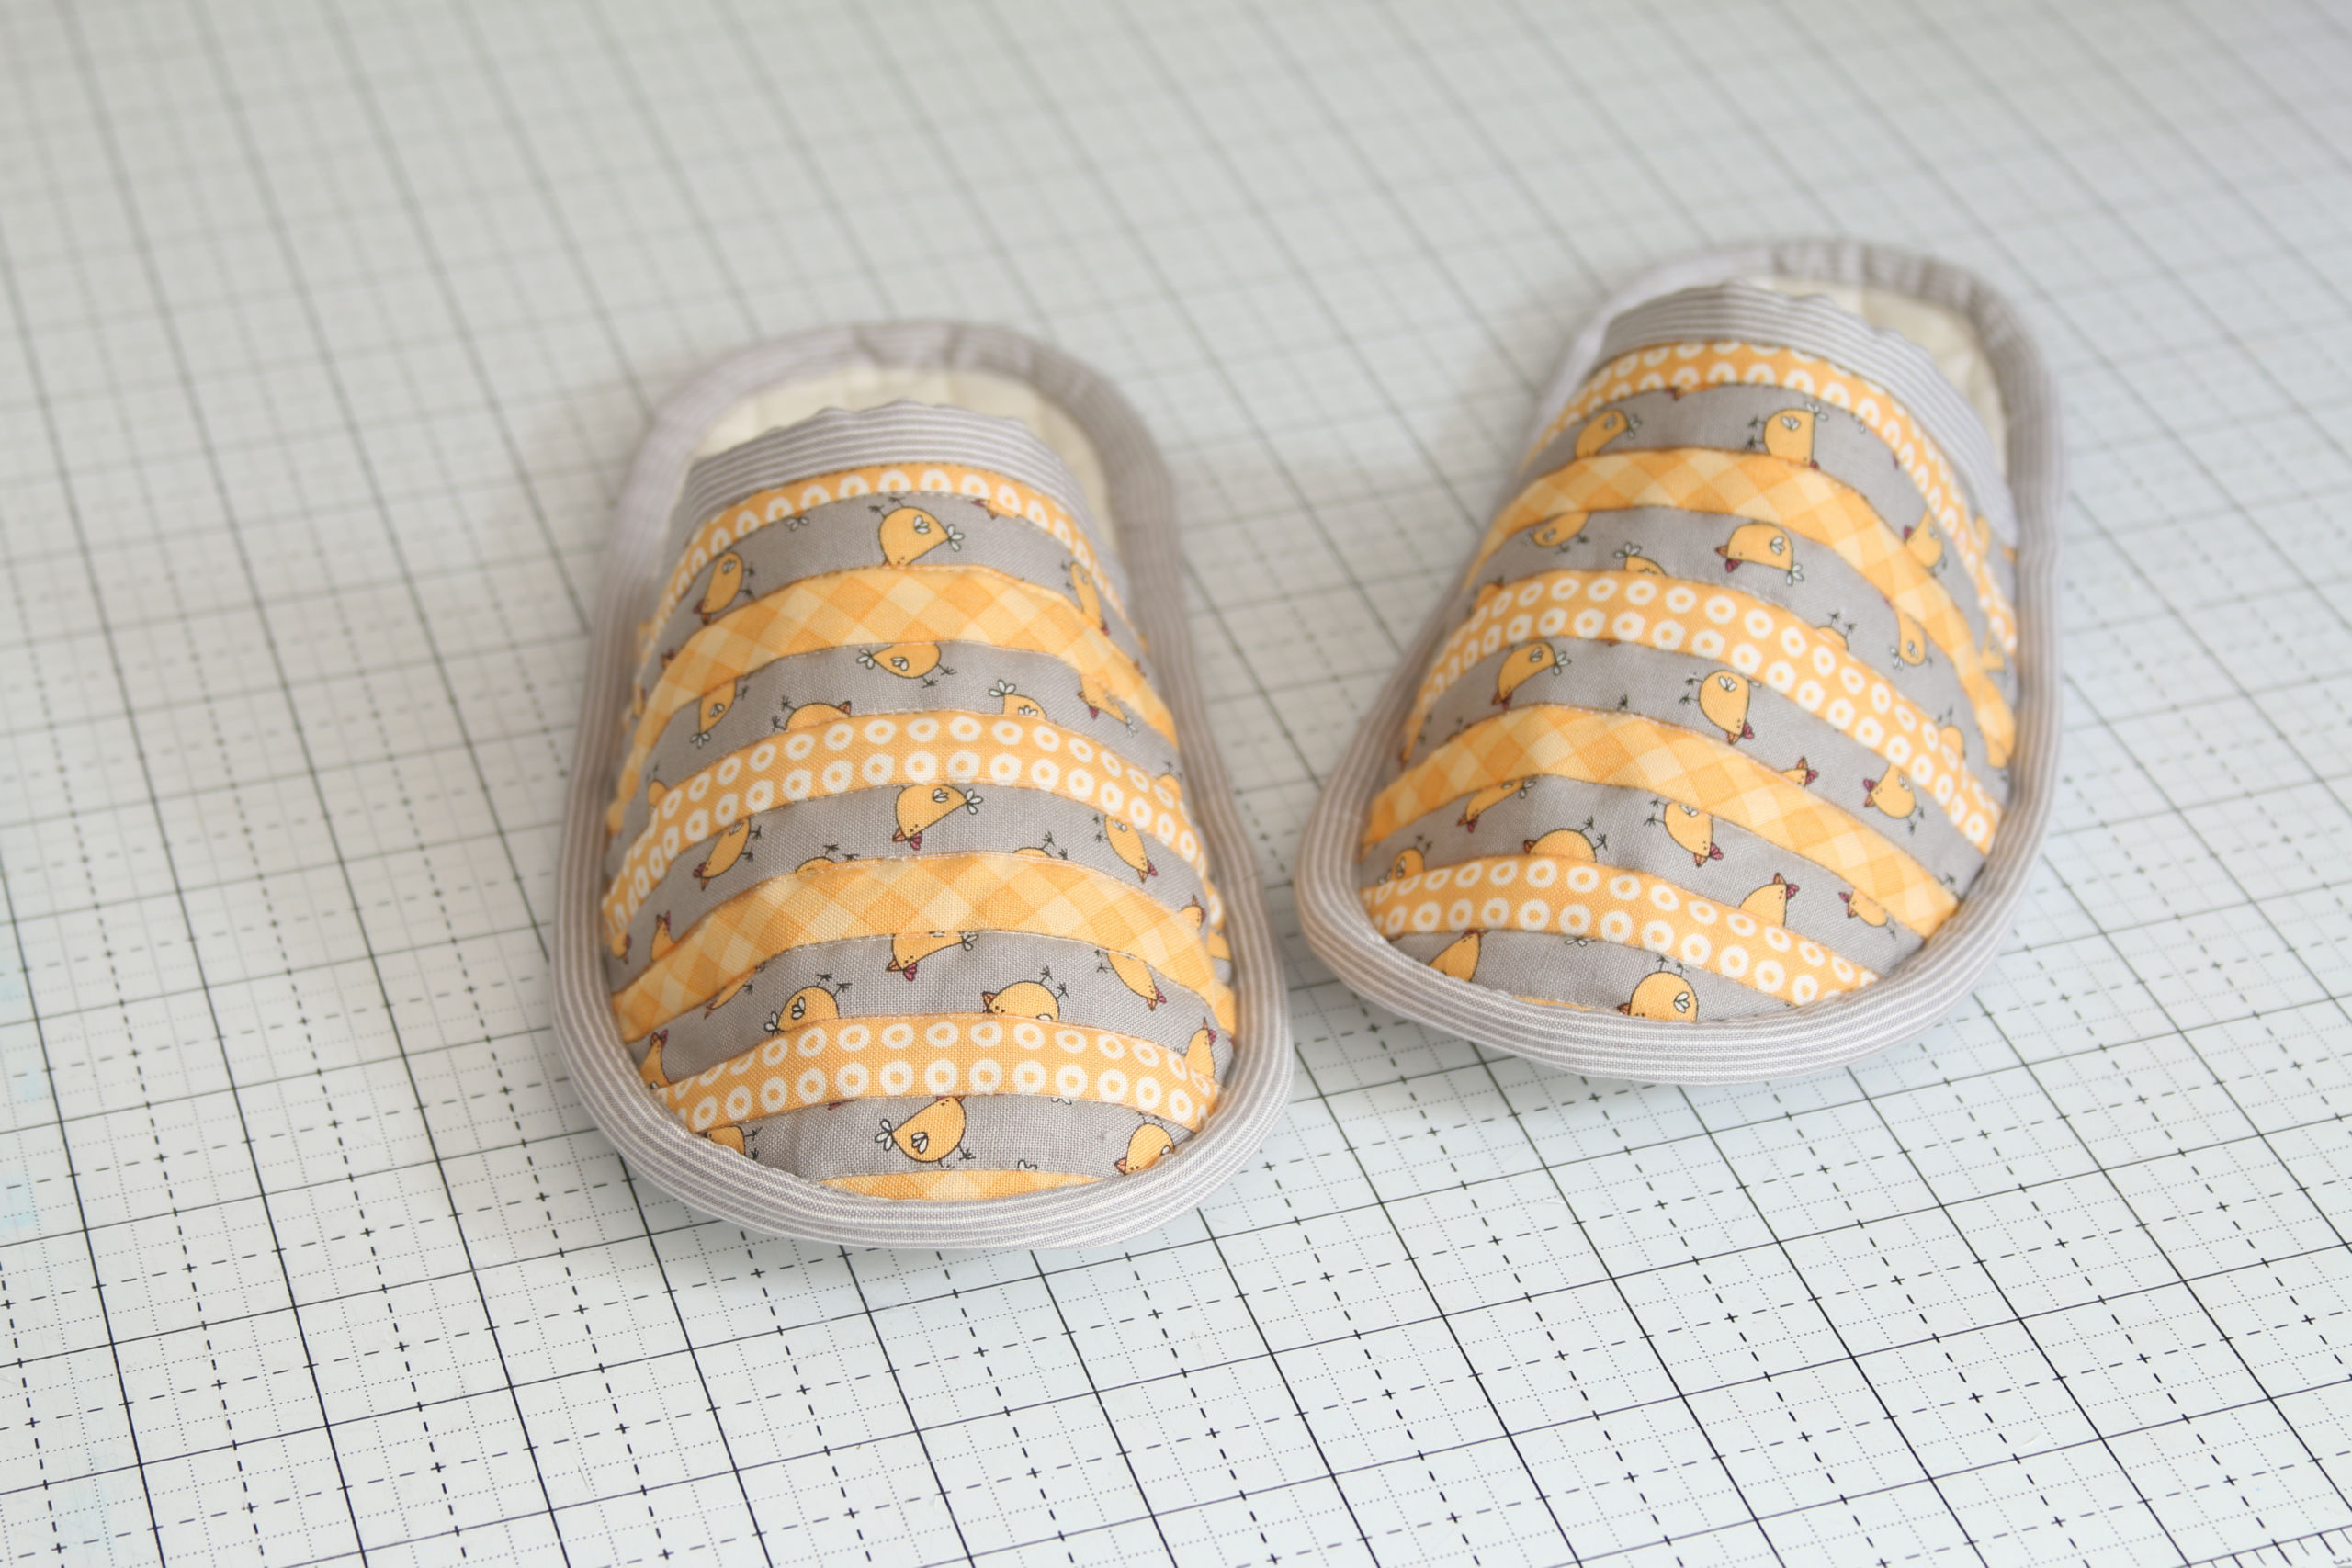 Learn everything you need to know to make a pair of quilted slippers that are just your size in this beginner-friendly photo tutorial! suzyquilts.com #quilting #sewingdiy